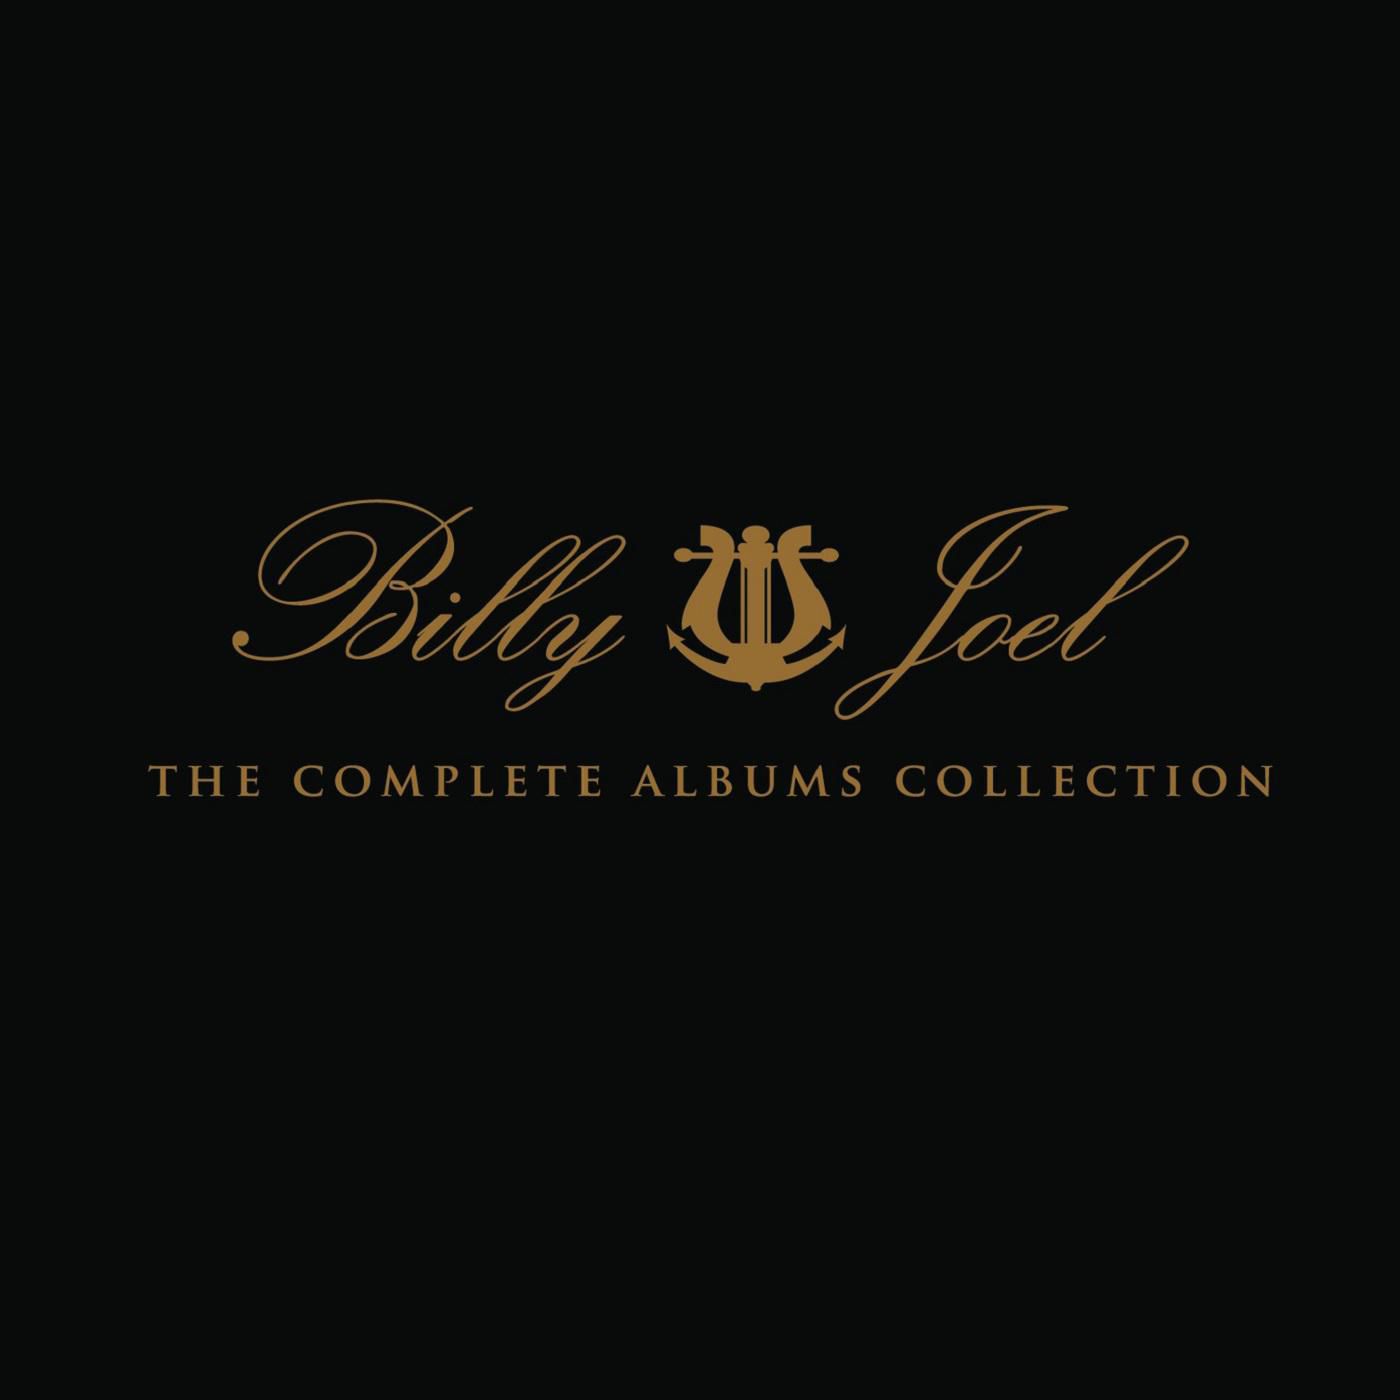 Billy Joel - The Complete Albums Collection (2011/2014) [Qobuz FLAC 24bit/96kHz]